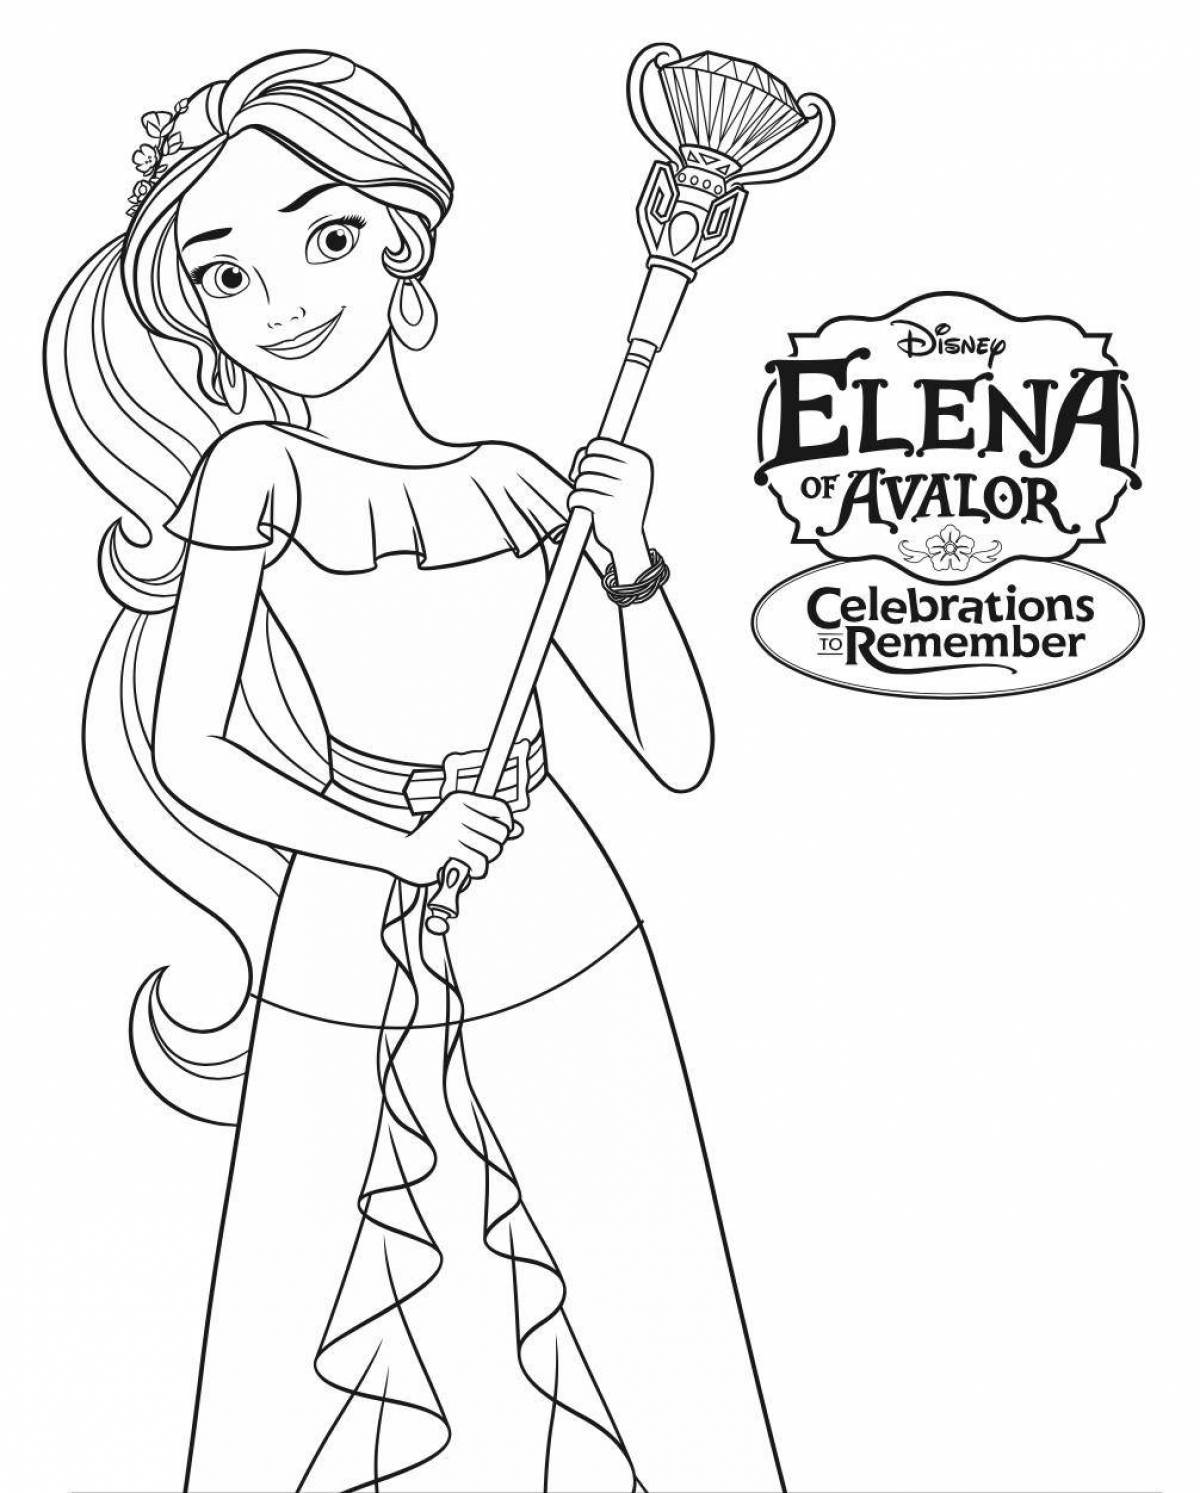 Coloring page charming elena of avalor